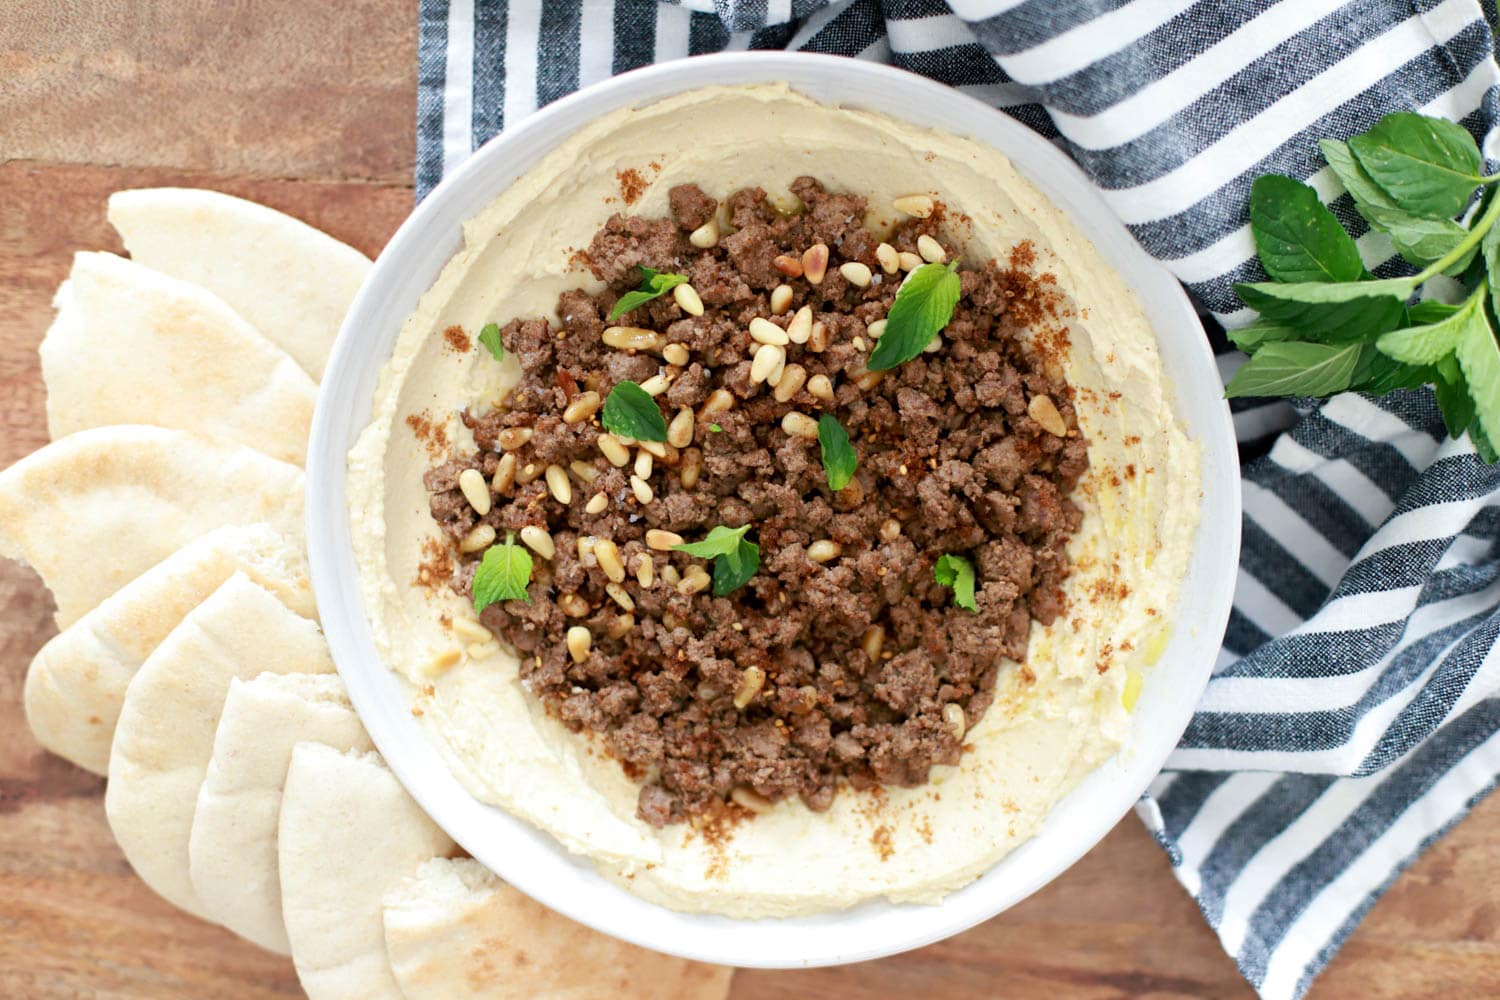 Spiced Ground Meat with Pine Nuts over Hummus Recipe